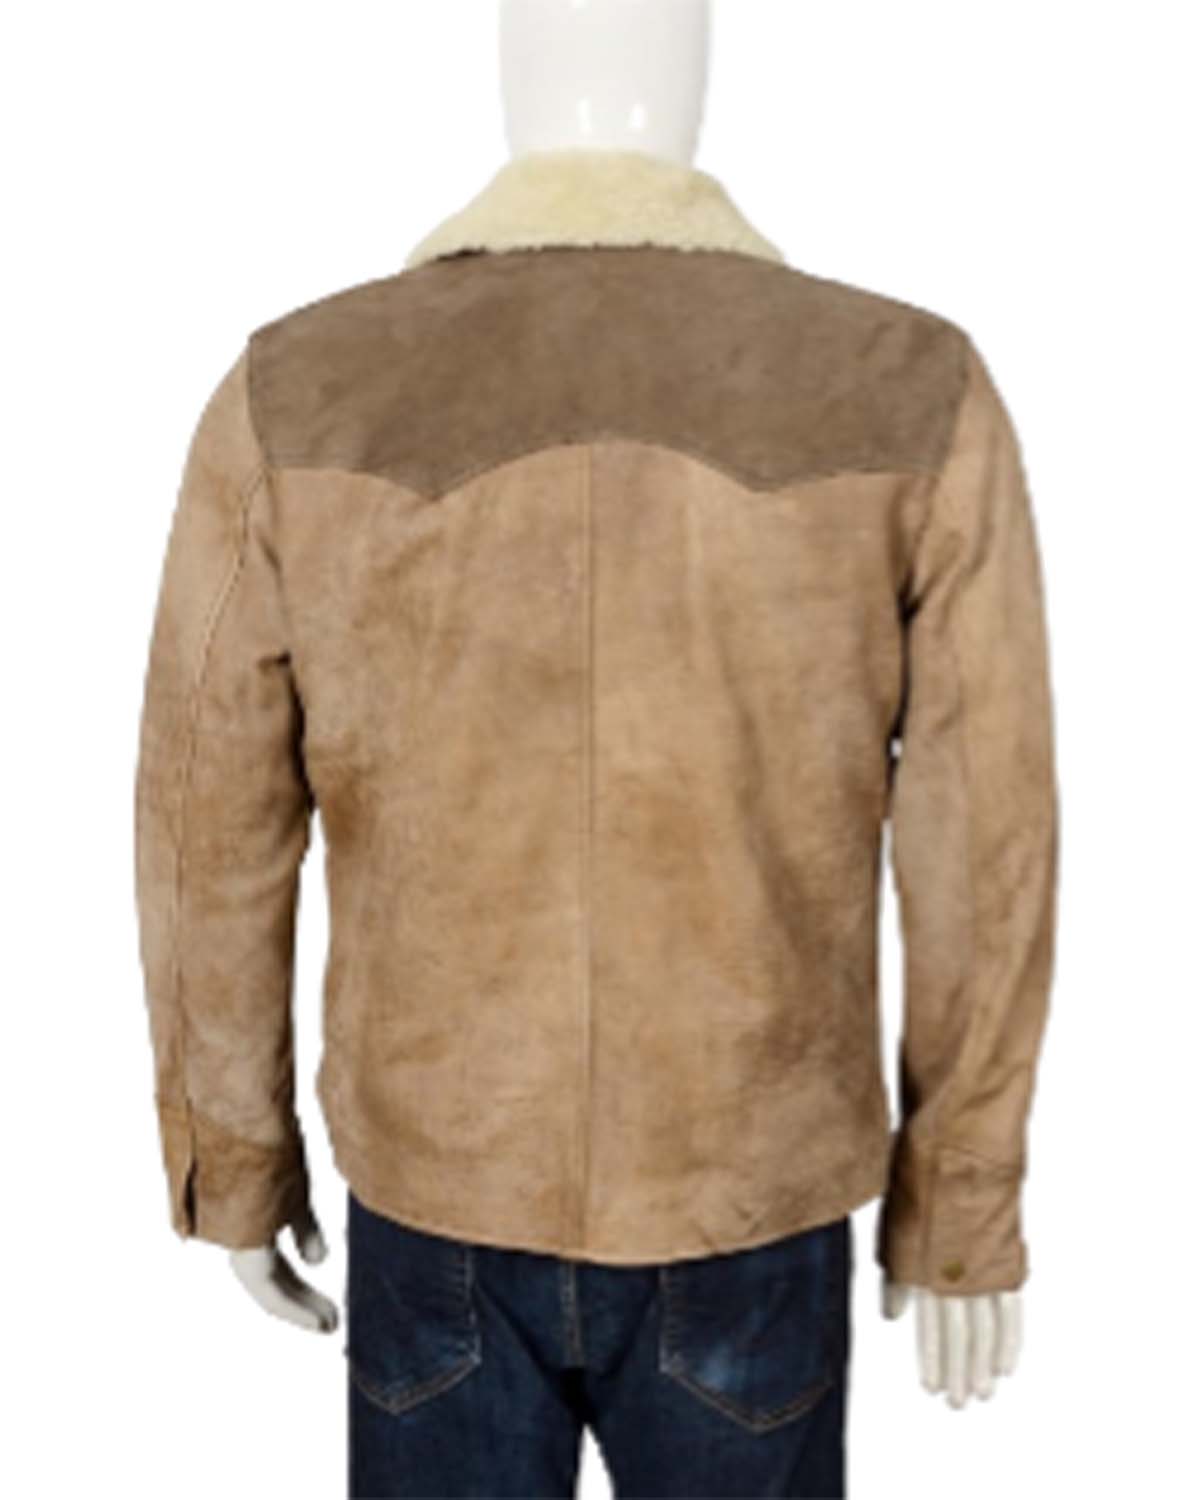 Elite Yellowstone Shearling Collar Buff Suede Leather Jacket